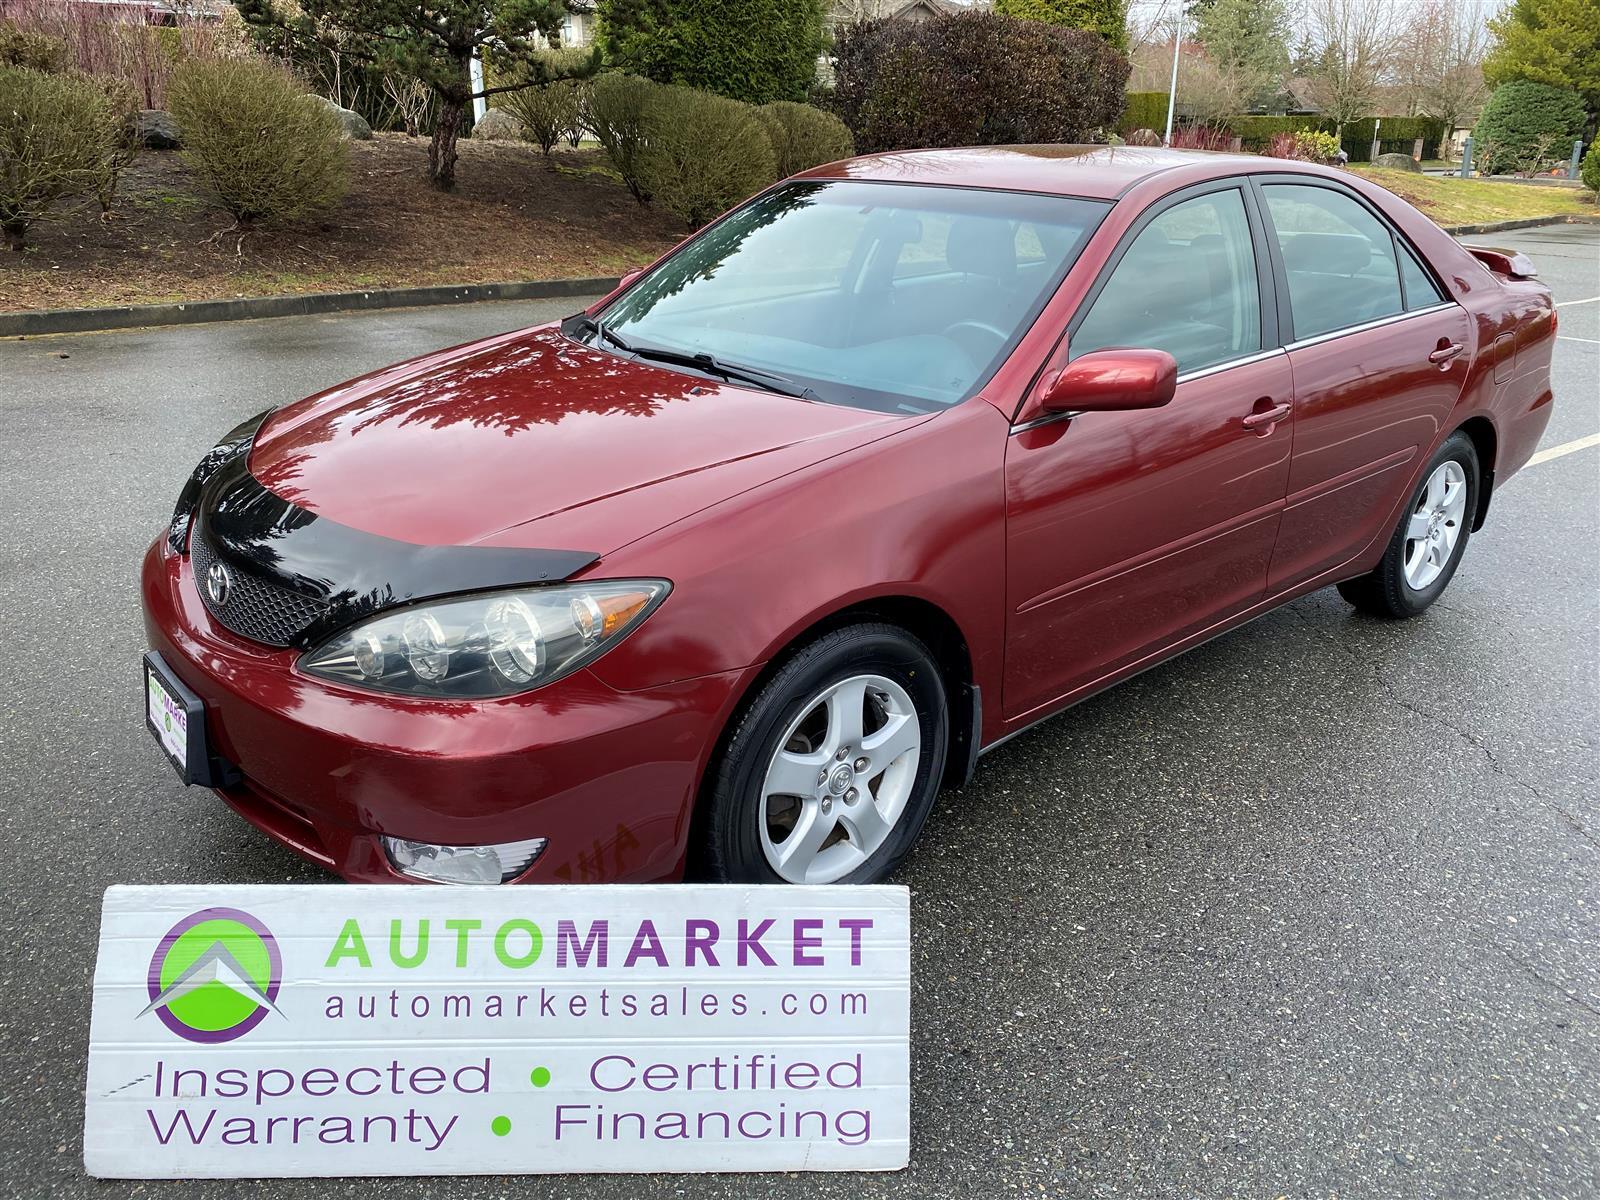 2006 Toyota Camry SE, AUTO, EXTRA CLEAN, FINANCING, WARRANTY, INSPEC